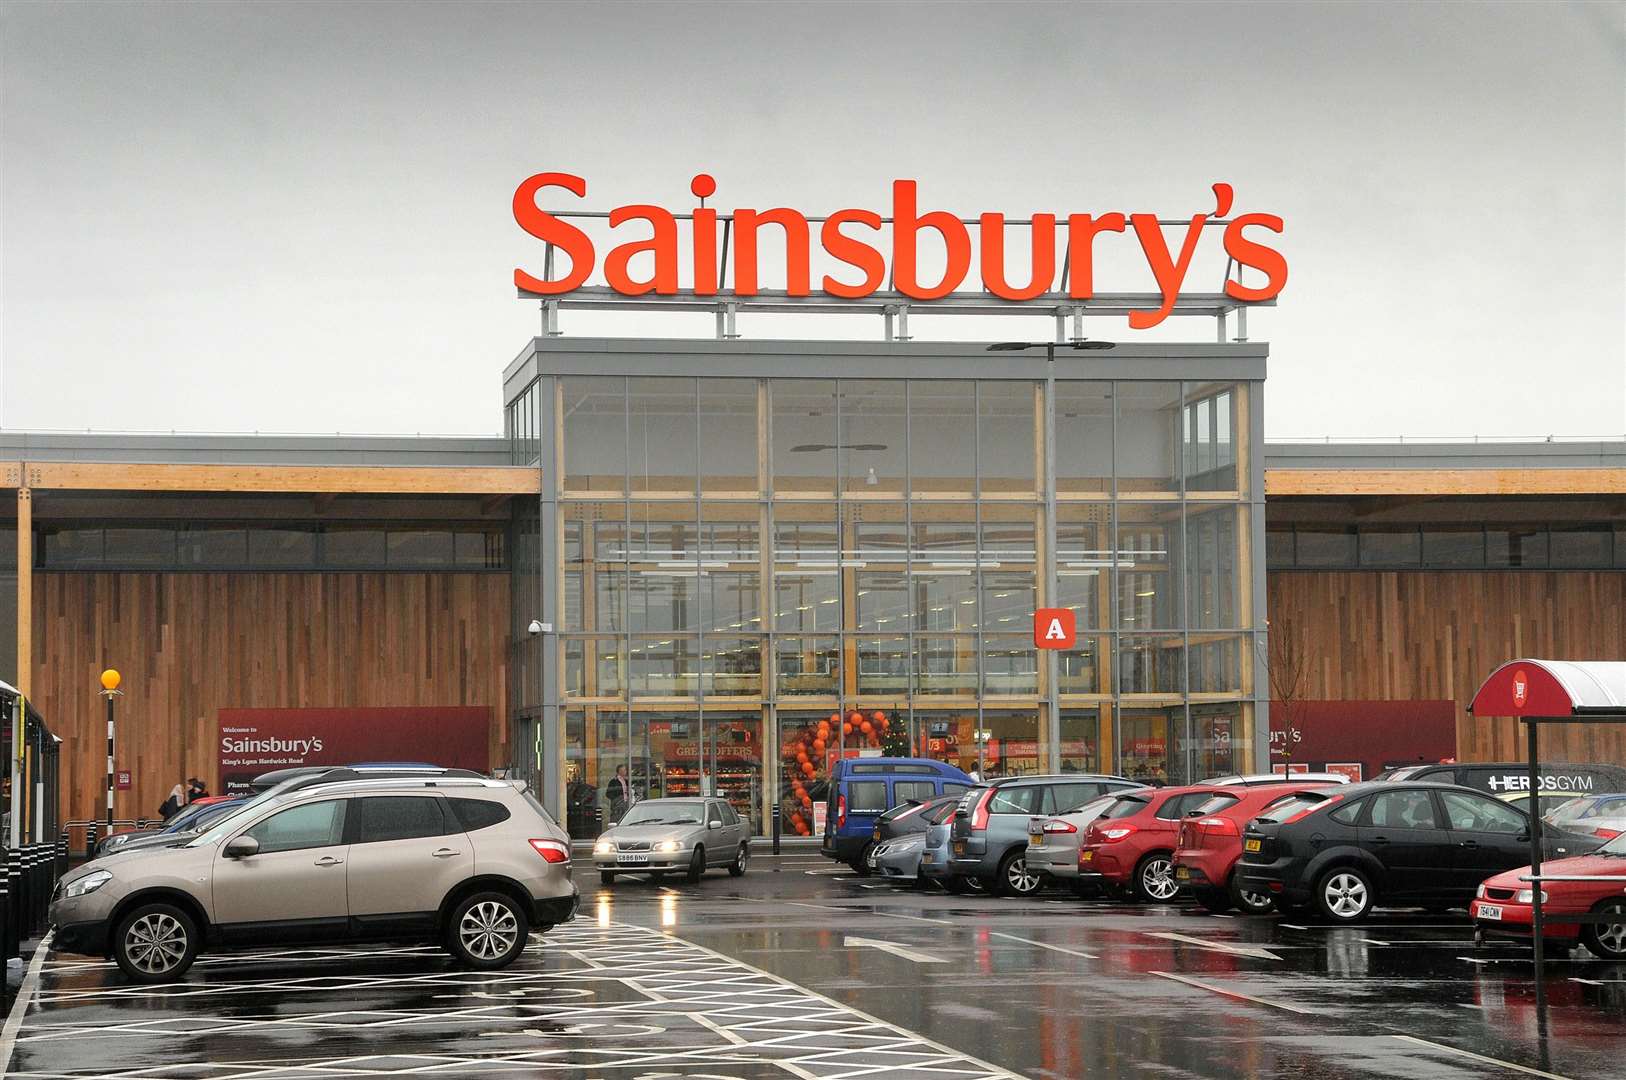 Sainsbury's at the Hardwick industrial estate in Lynn